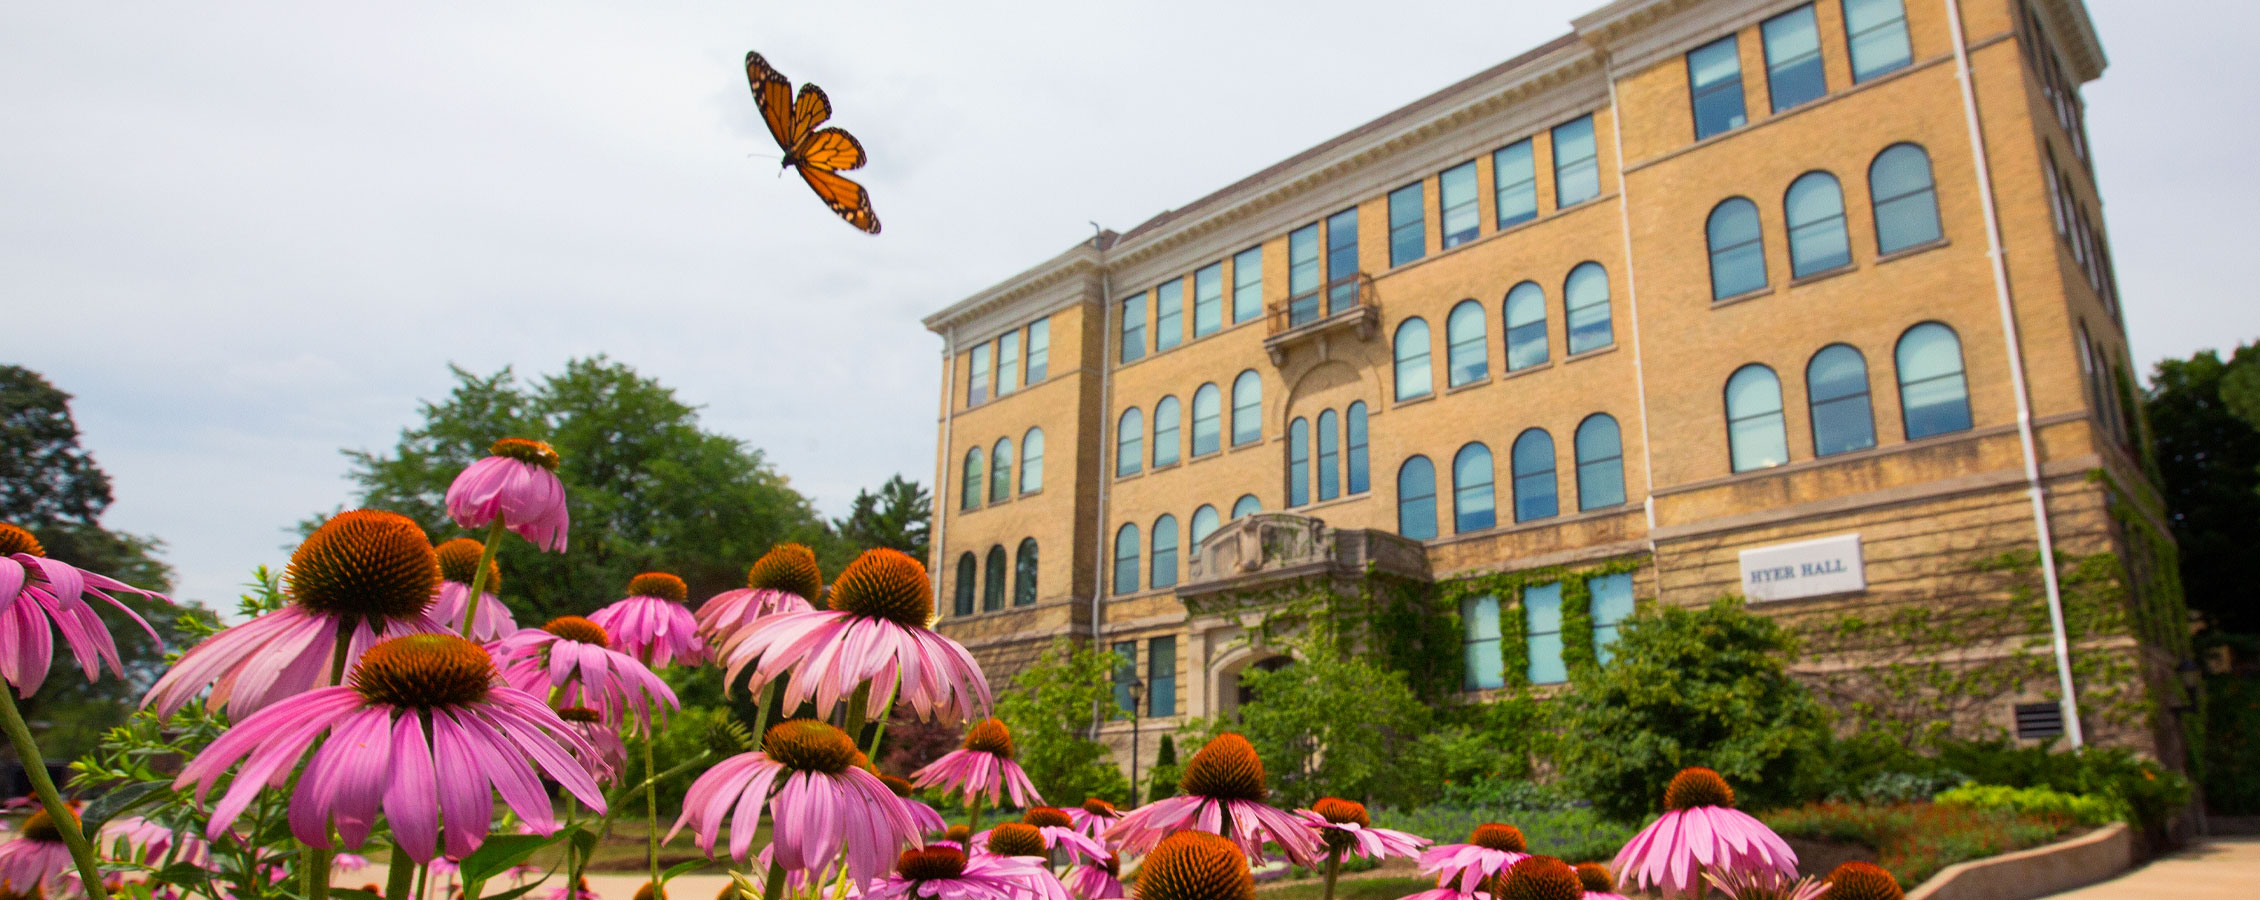 Exterior of Hyer Hall with a monarch flying in front of it.